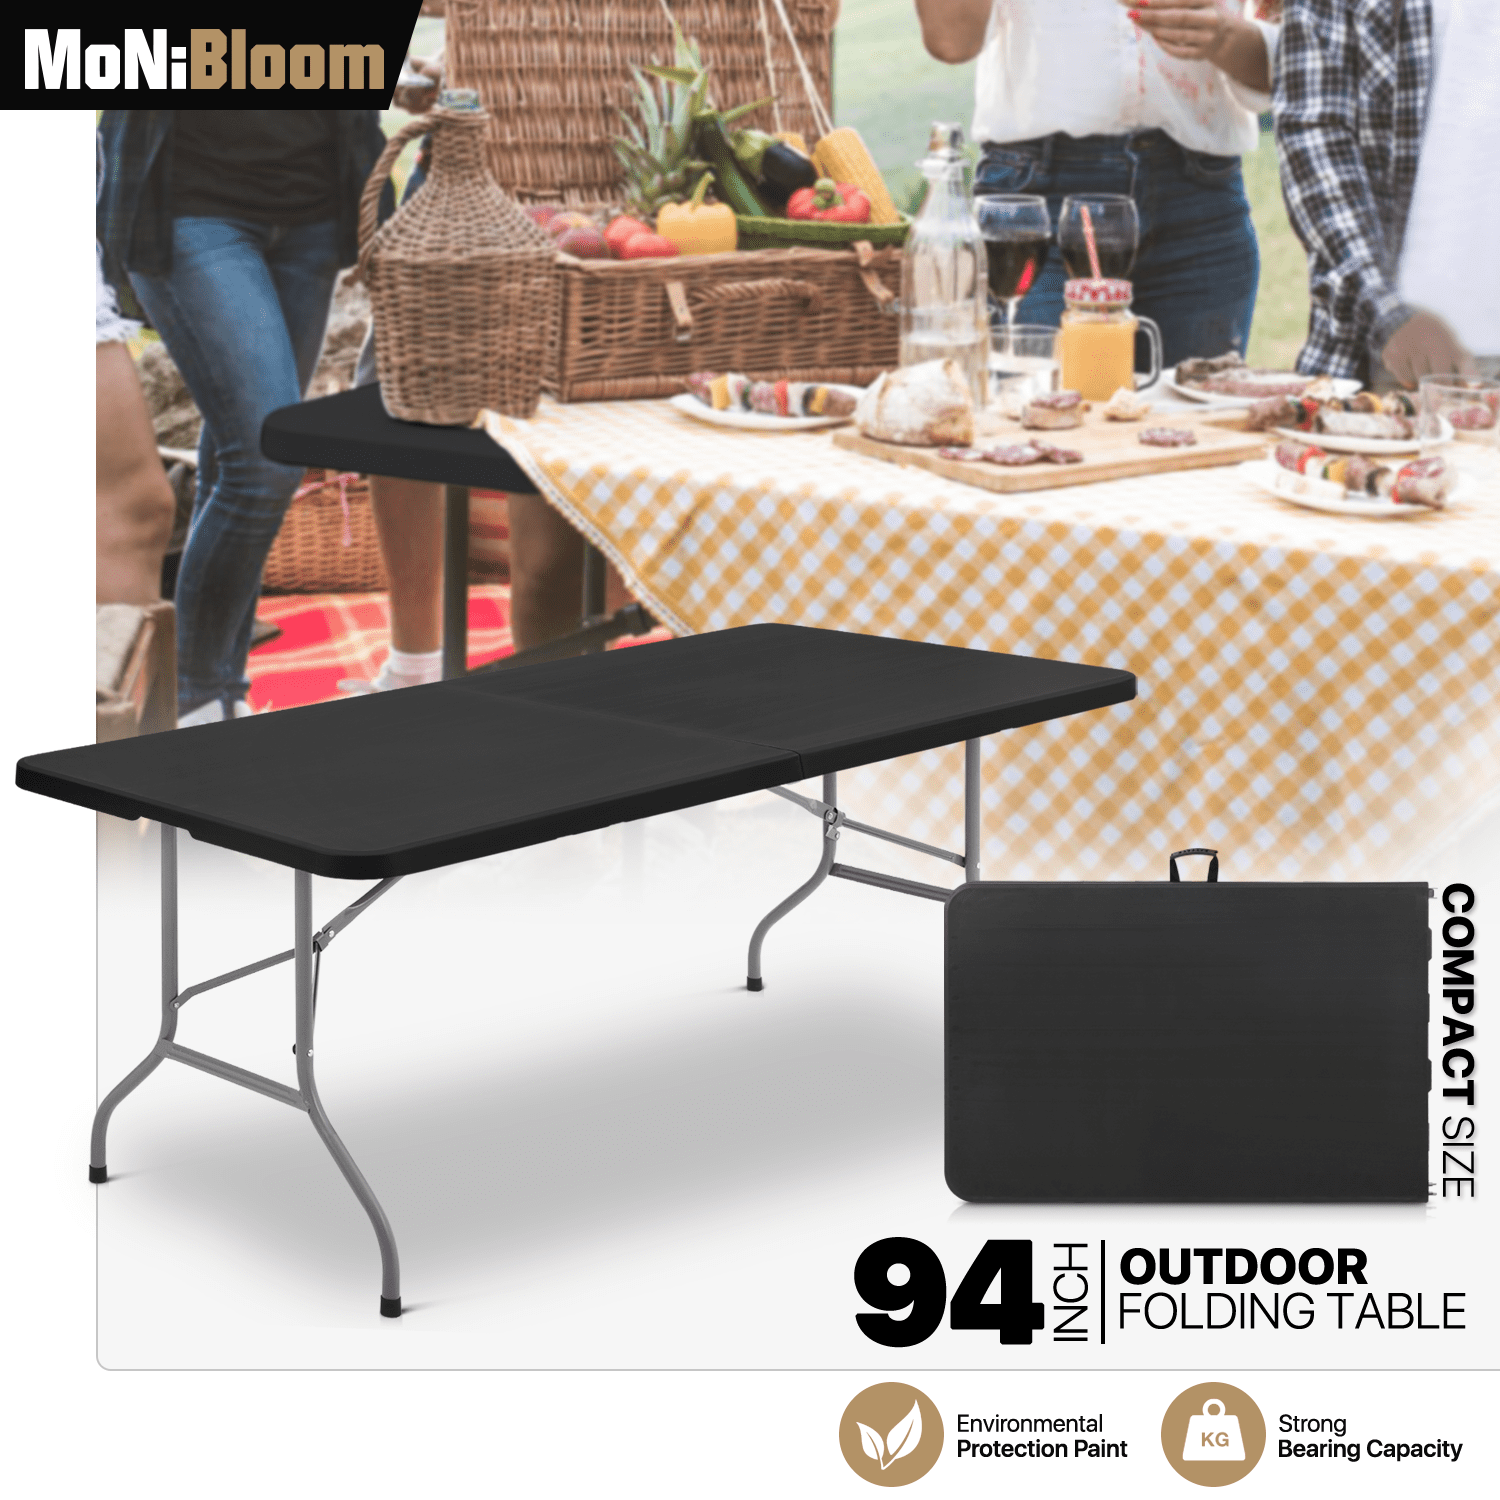 MoNiBloom 8FT Outdoor Dining Table Plastic Folding Table Rectangle Camping  Desk for Outdoor Party BBQ Camping with Carrying Handle, Black